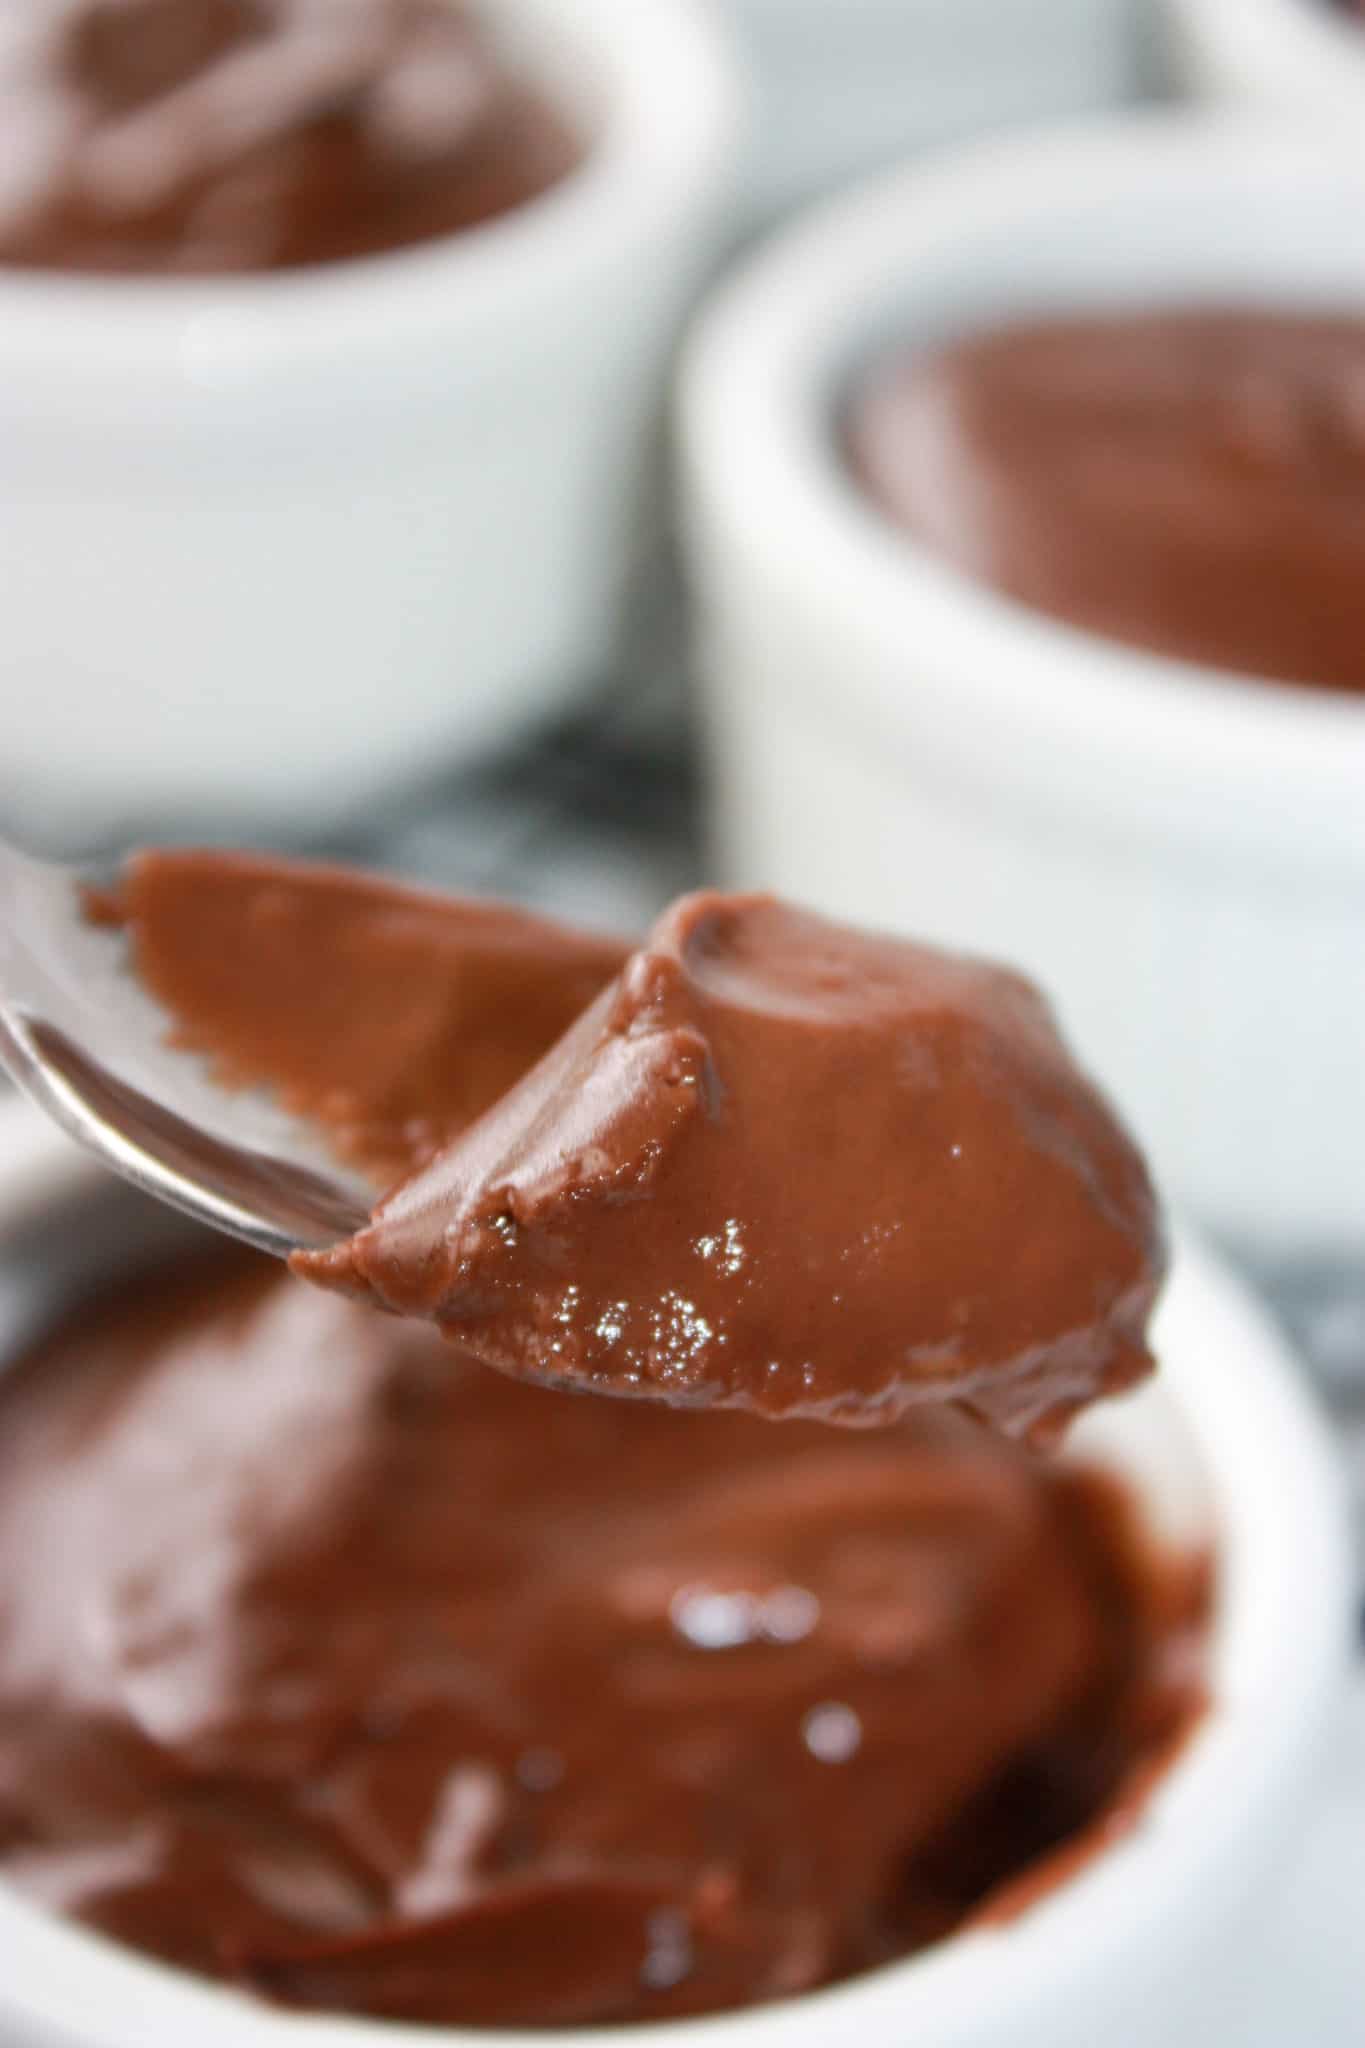 Dairy Free Chocolate Pudding is a creamy, chocolatey, dessert recipe that really hits the spot for those that have to avoid dairy.